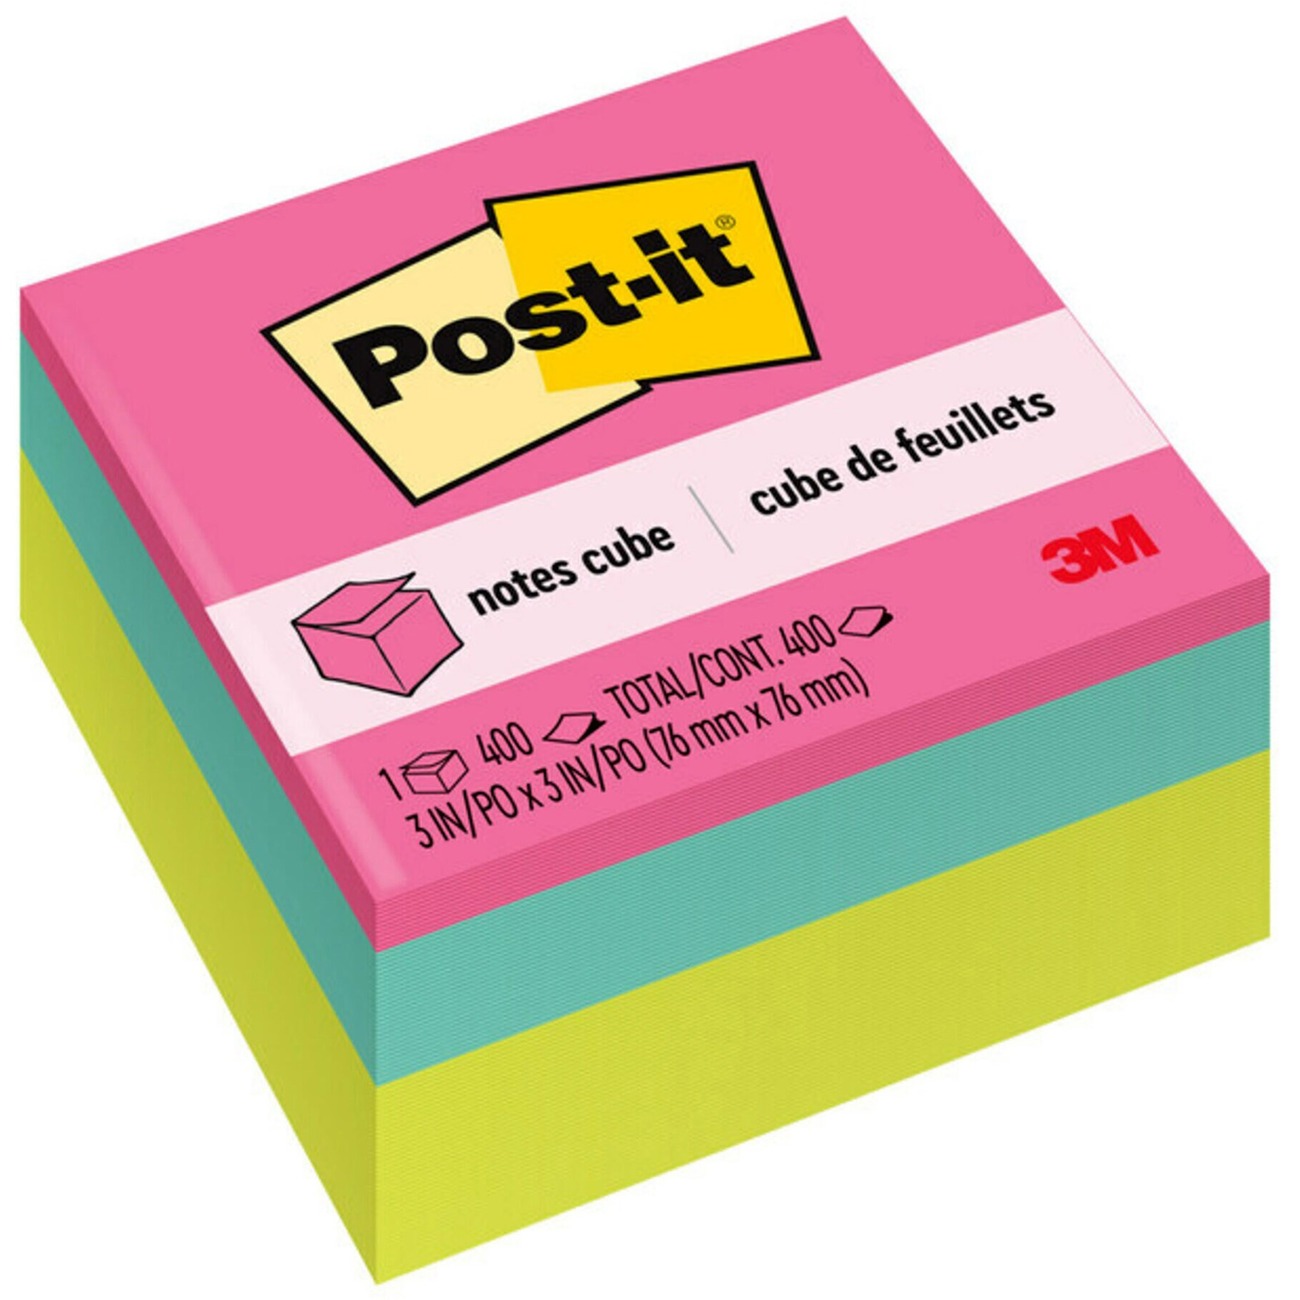  Post-it Notes, 3x3 in, 4 Pads, Canary Yellow, Clean Removal,  Recyclable : Post I T Notes : Office Products